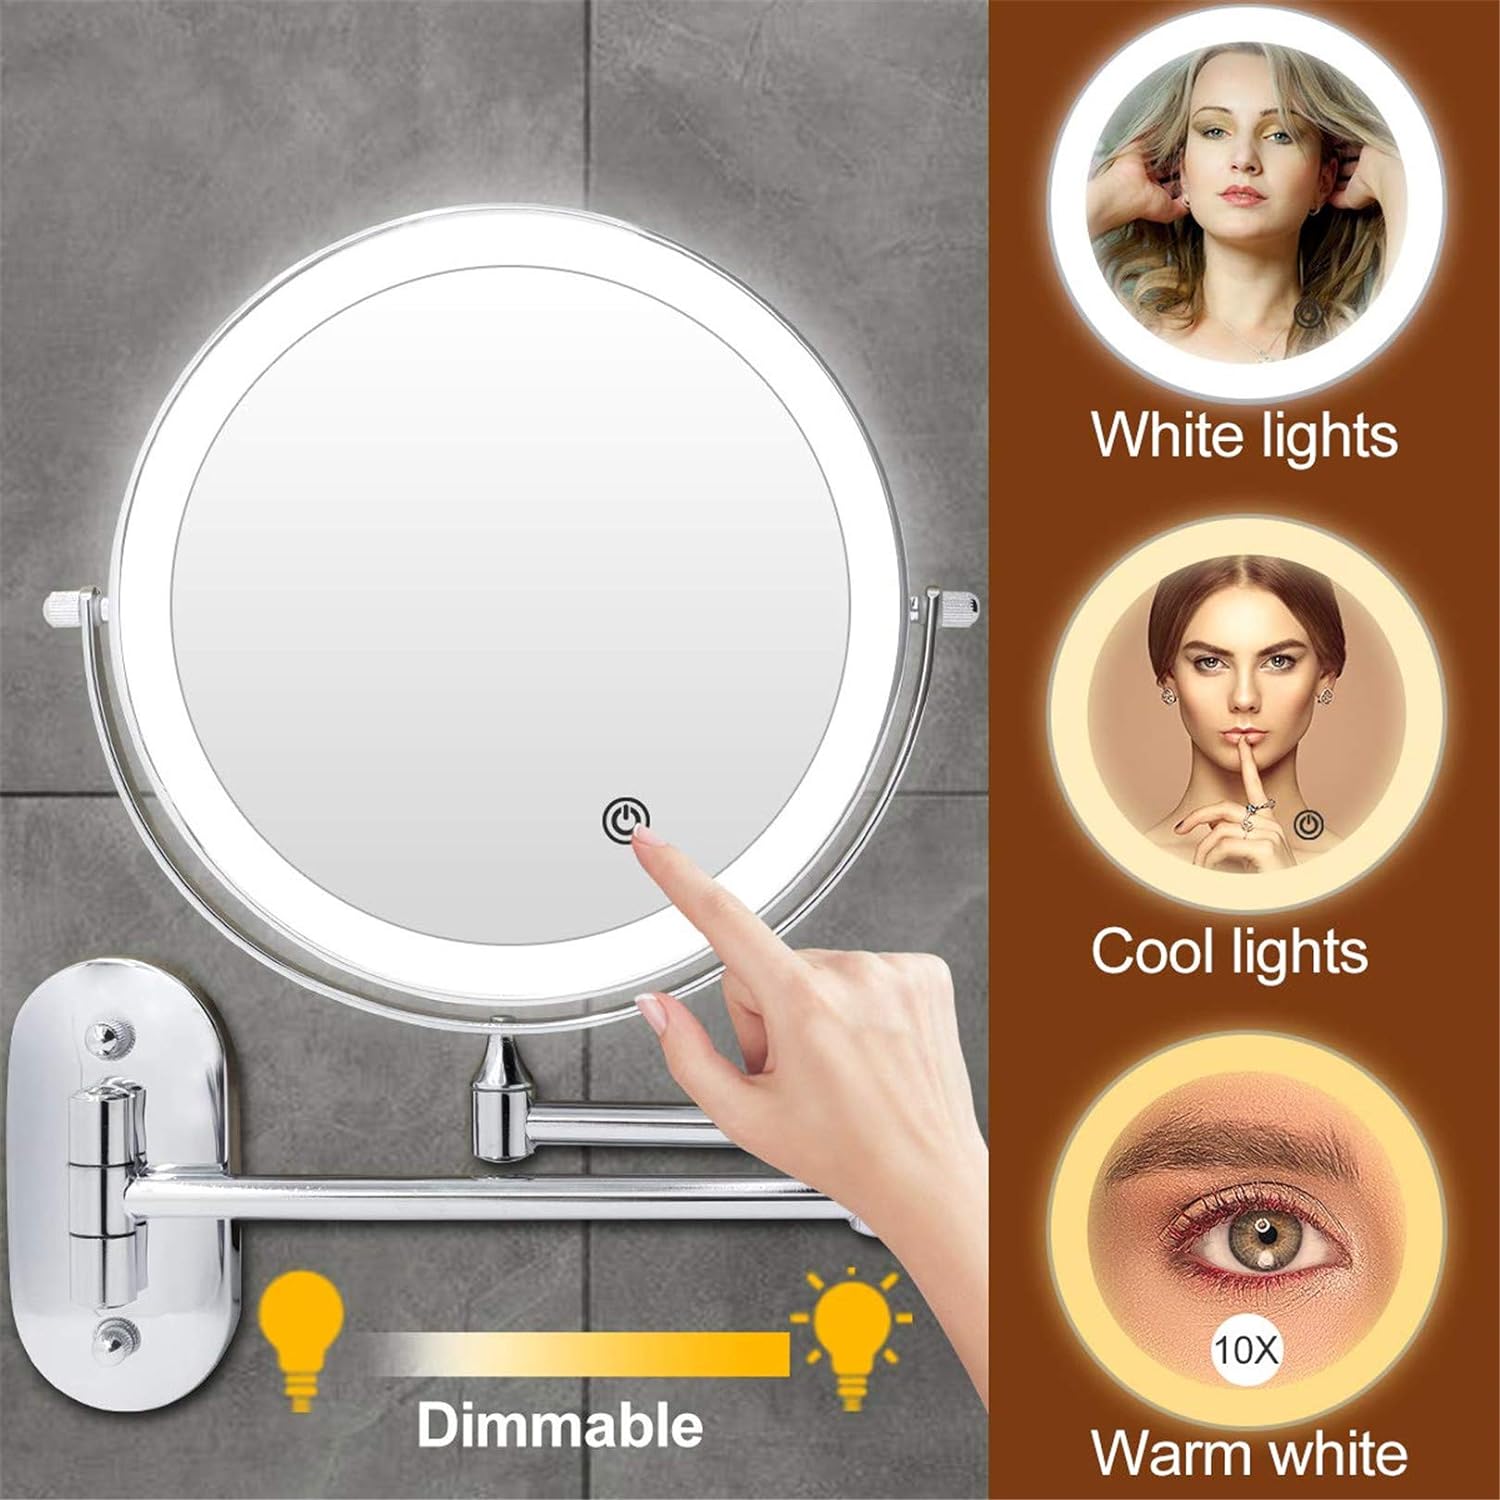 10x Magnifying Makeup Mirror, Lighted Magnified Makeup Mirror Wall Mounted